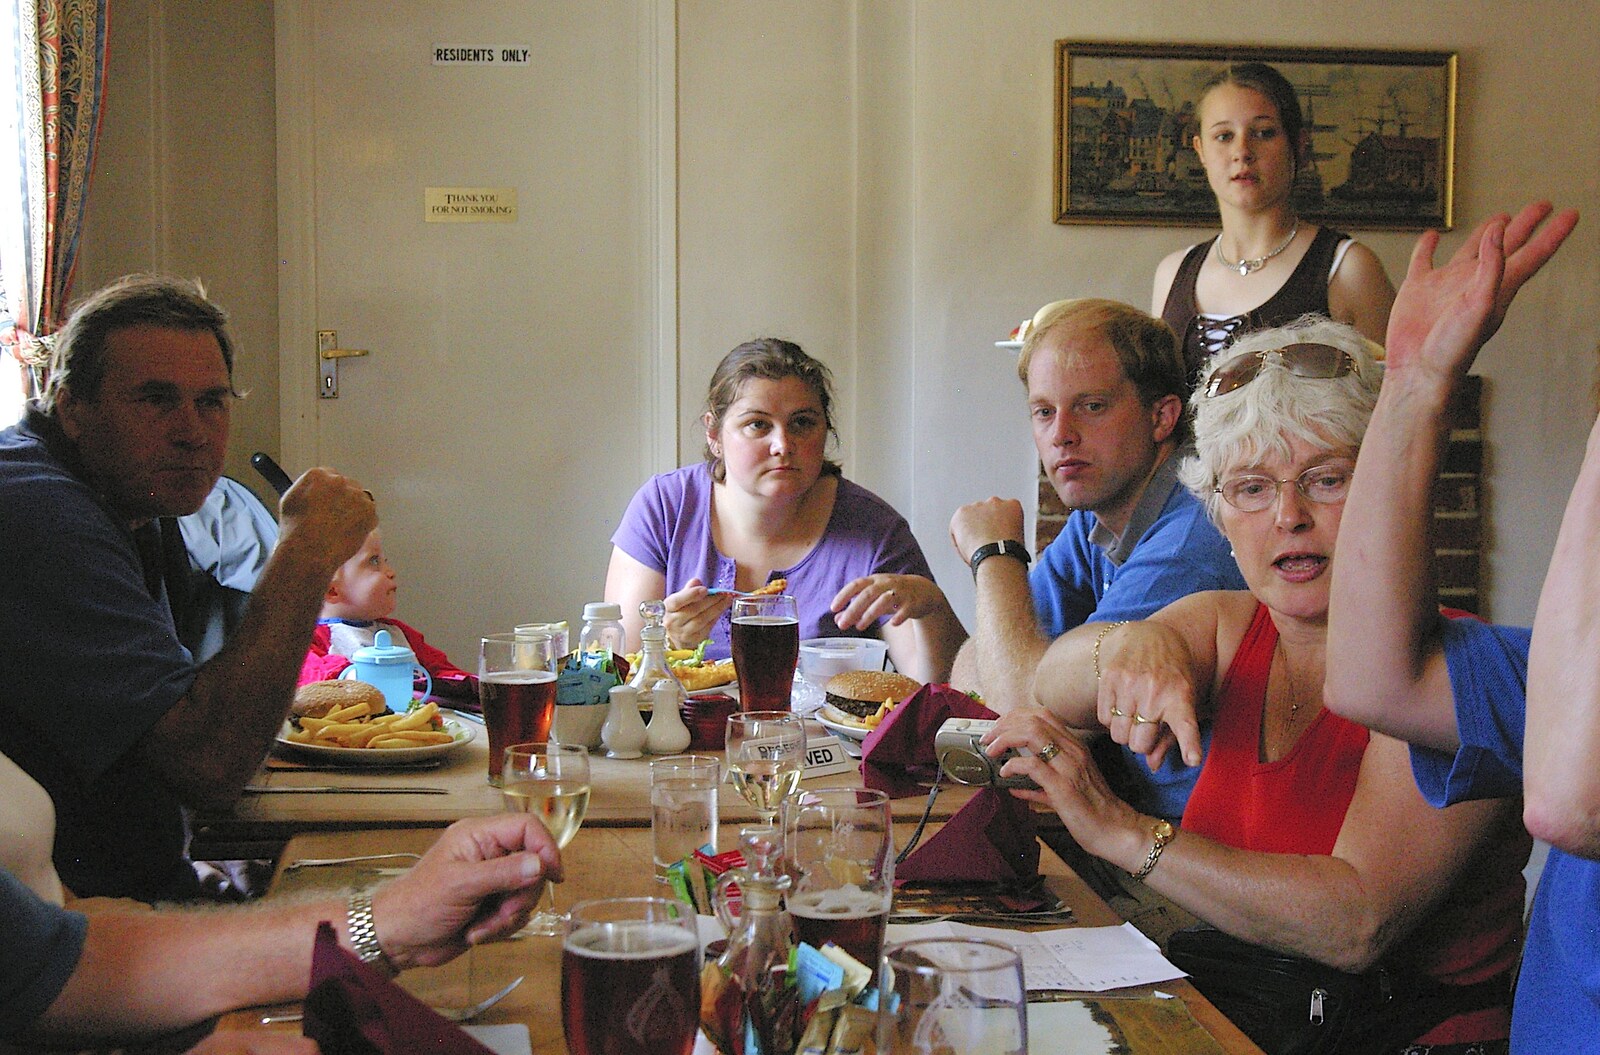 Time for lunch in the King's Head at Orford from The BSCC Charity Bike Ride, Orford, Suffolk - 15th July 2006